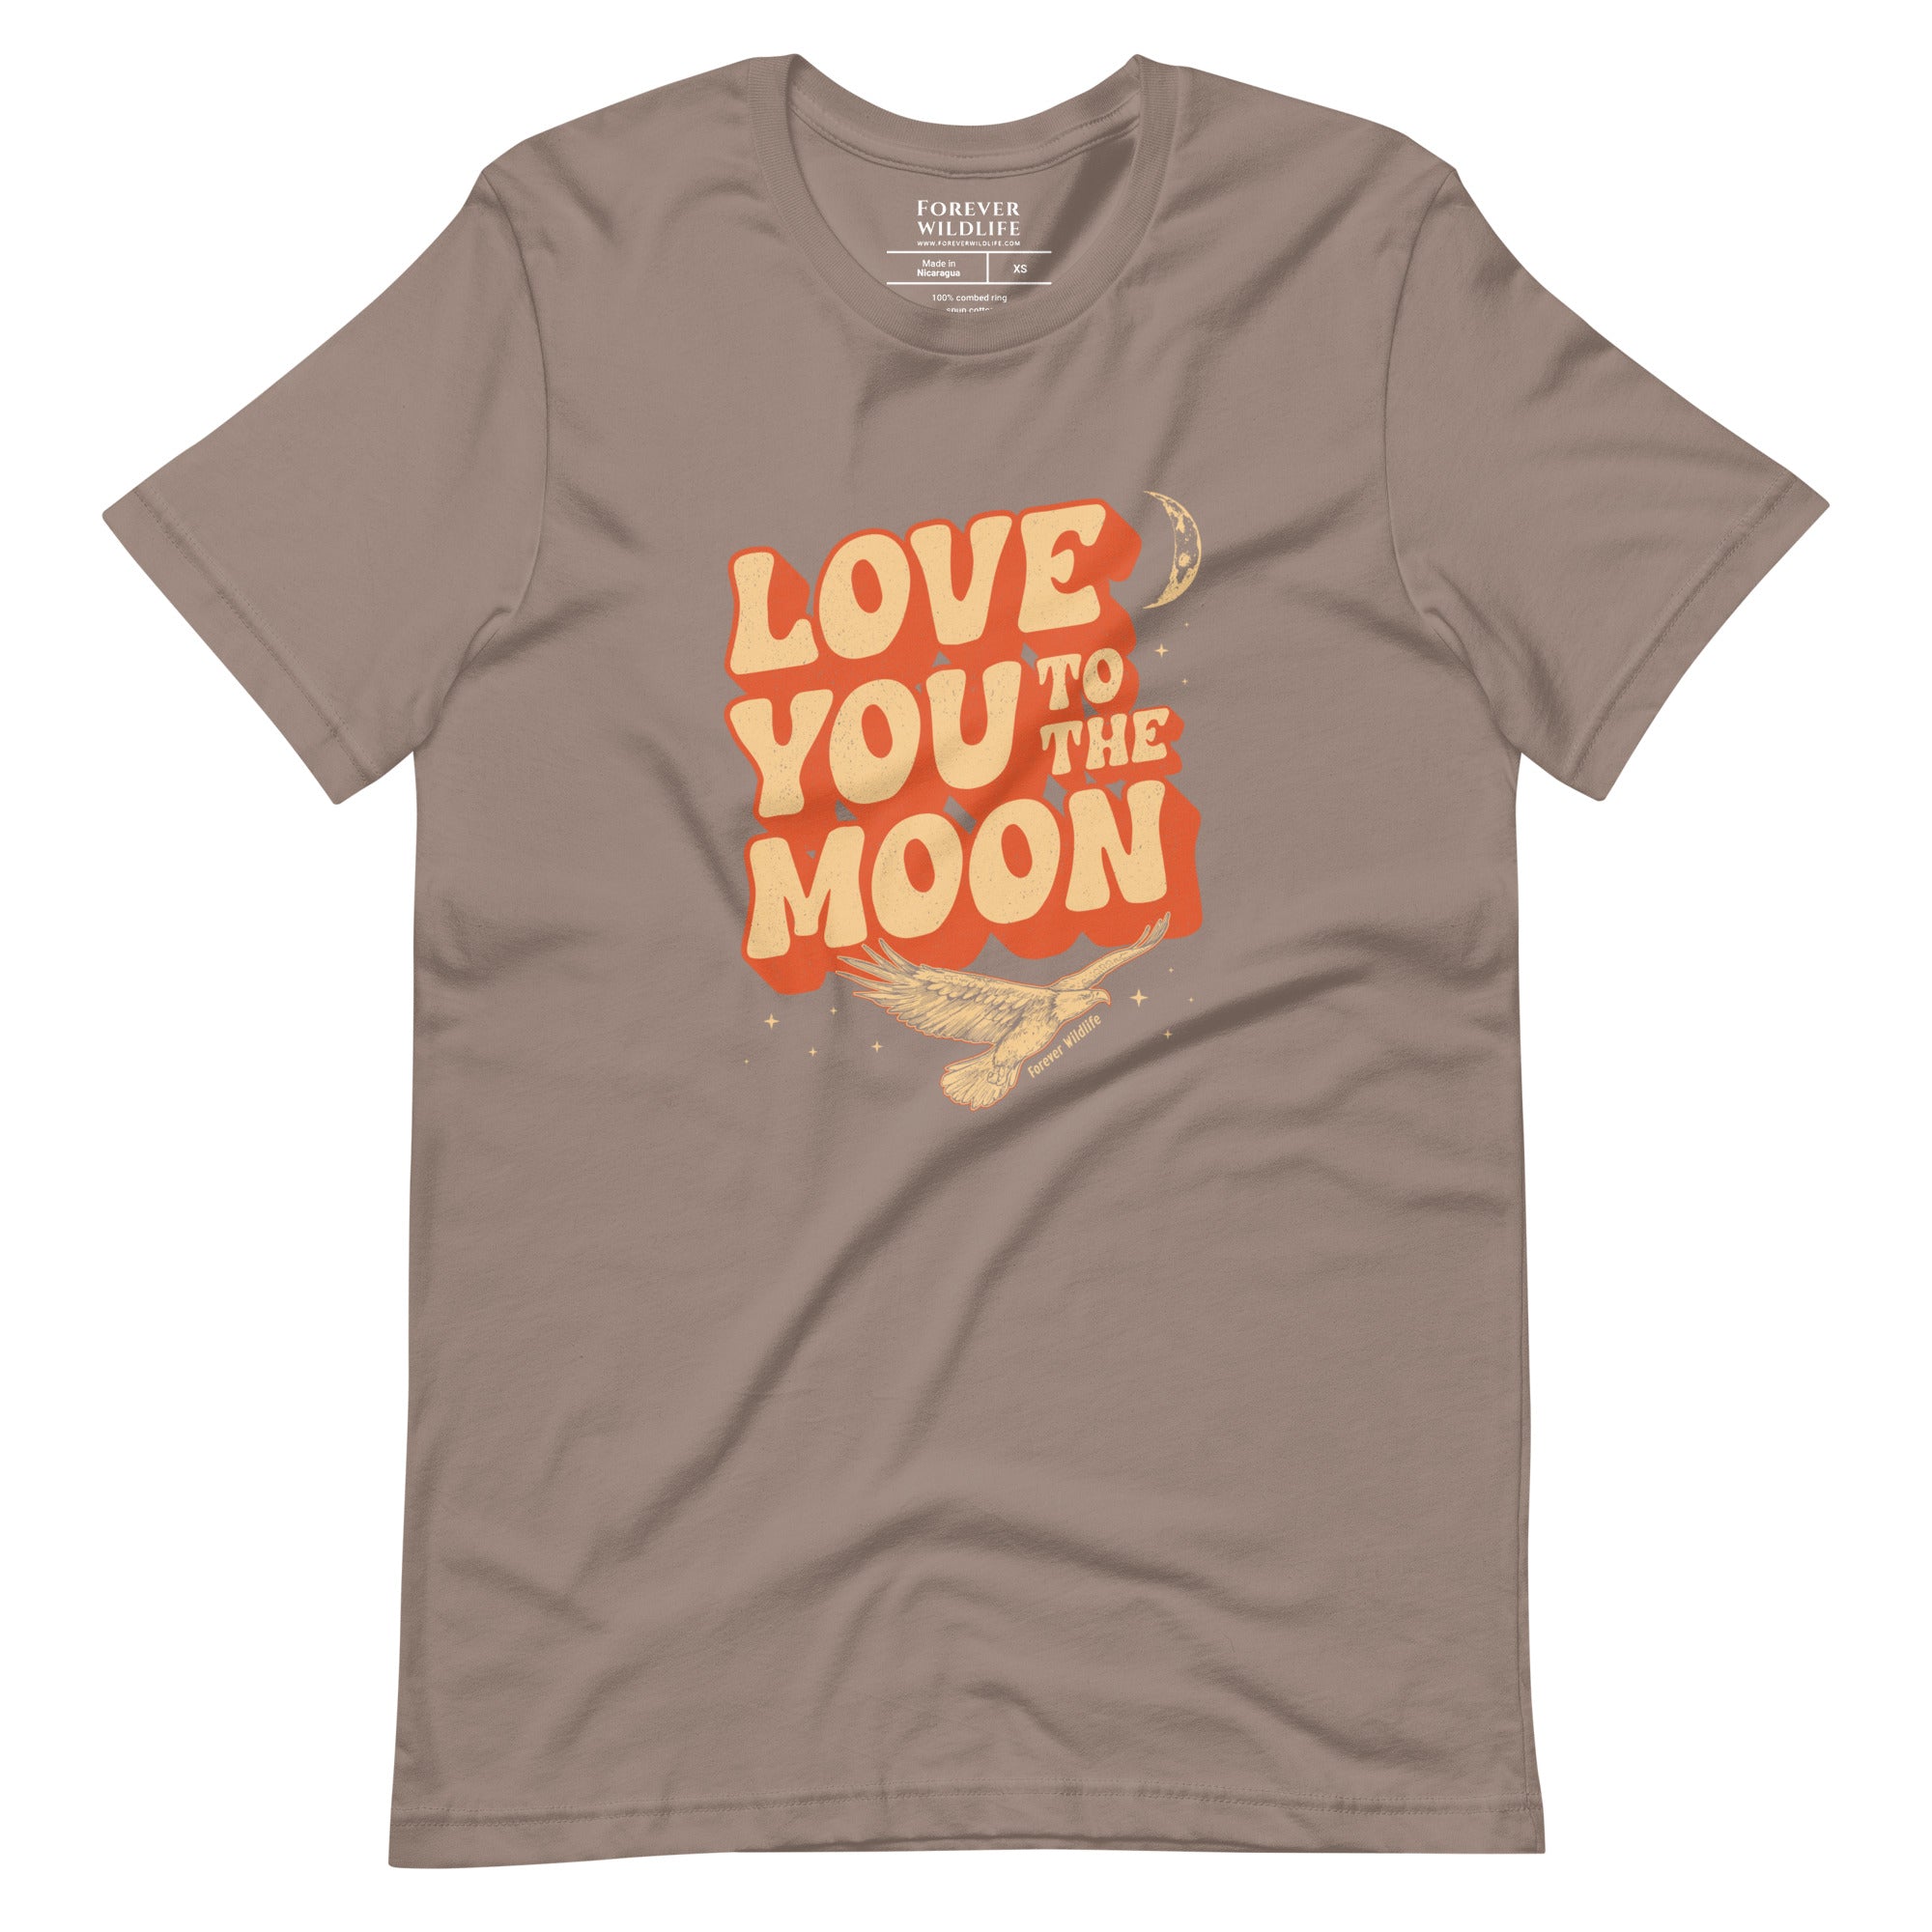 Eagle T-Shirt in Pebble – Premium Wildlife T-Shirt Design with Love You To The Moon Text, Eagle Shirts and Wildlife Clothing